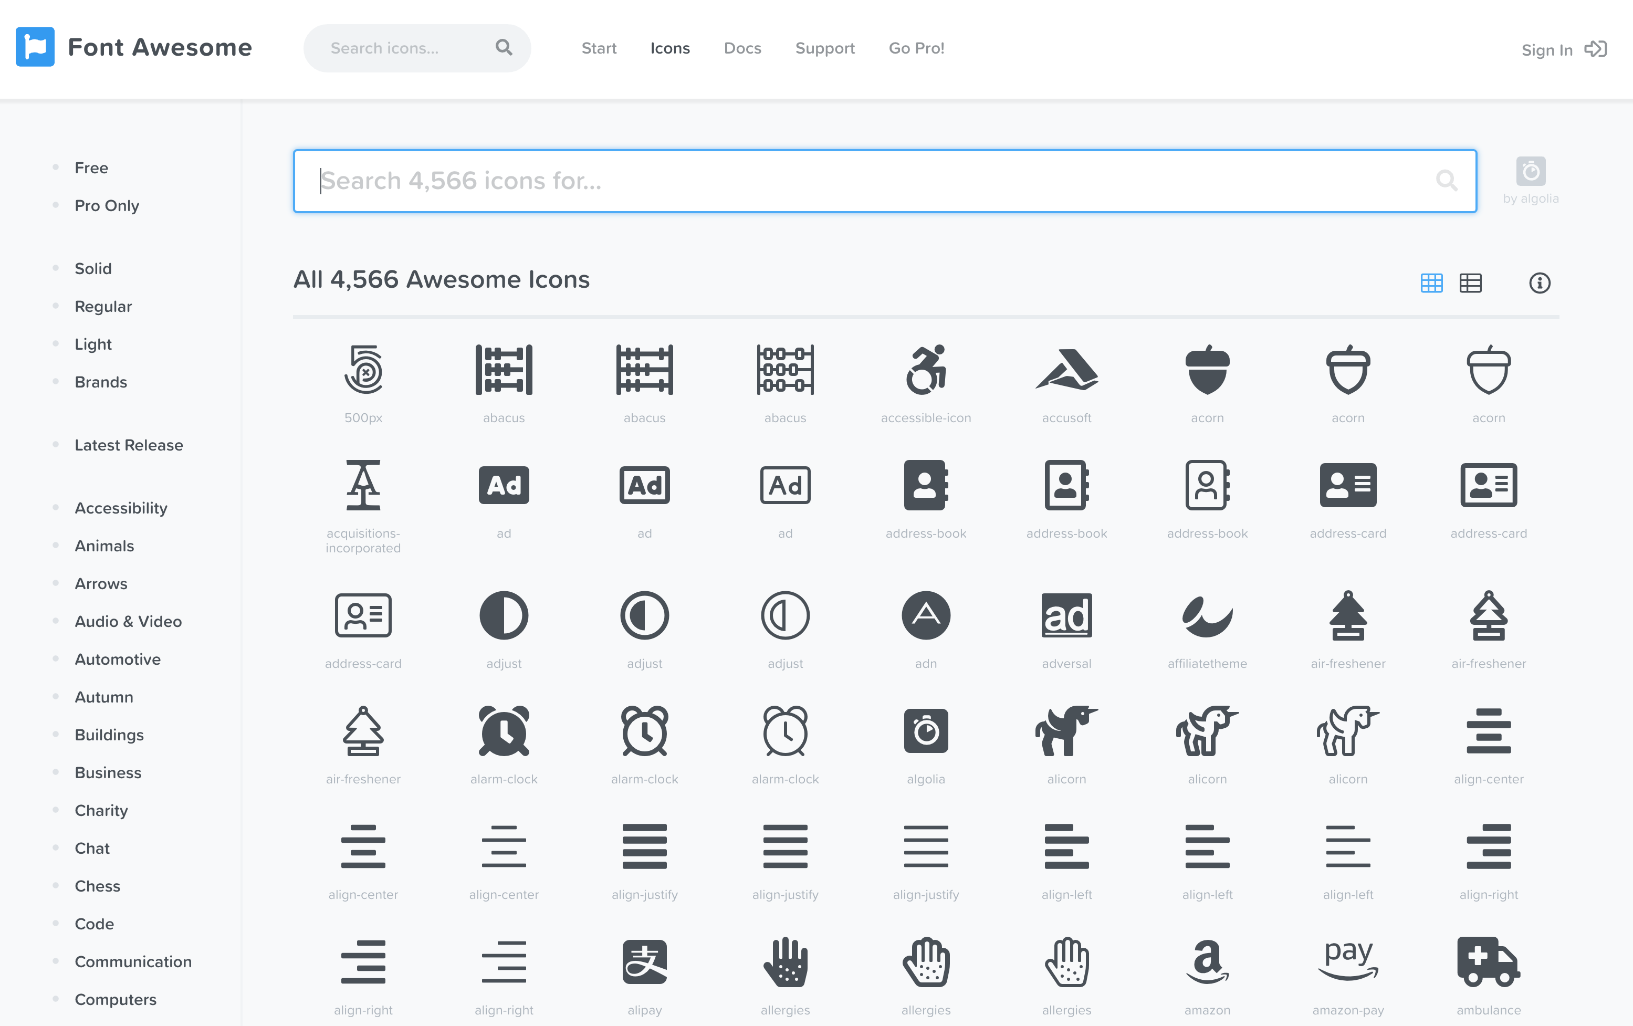 Font Awesome icons